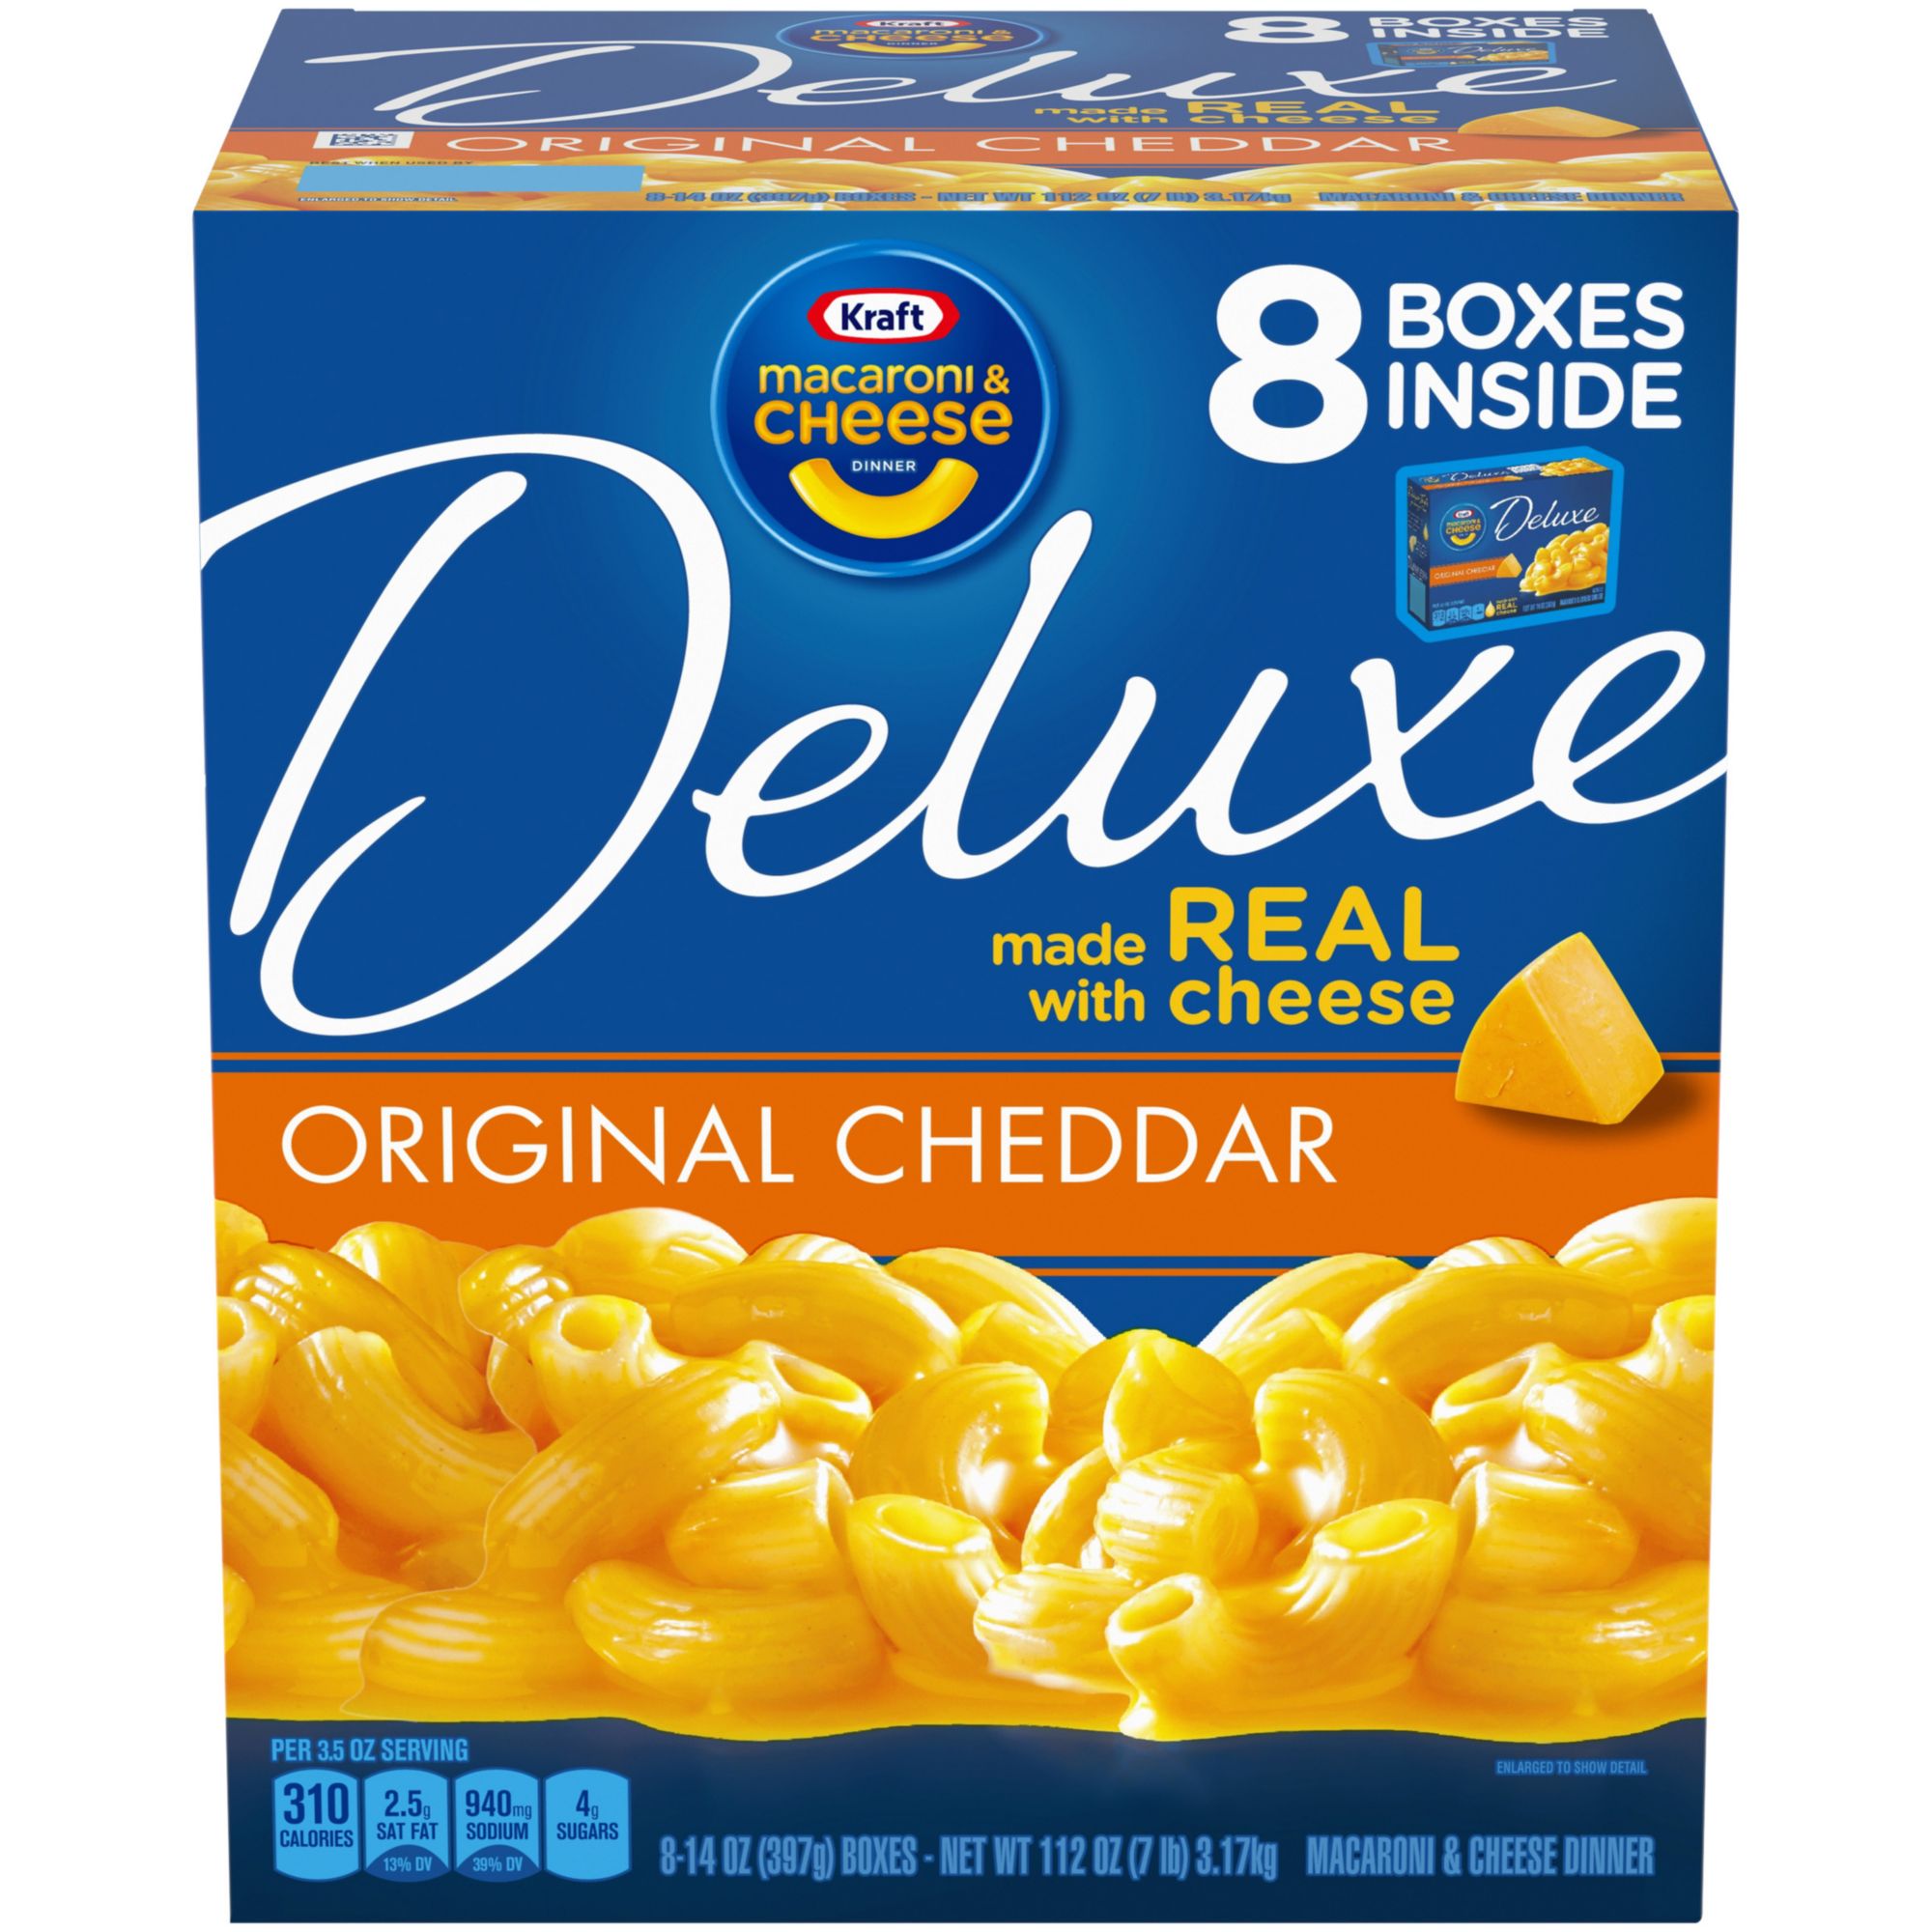 Kraft Mac & Cheese Delivery & Pickup